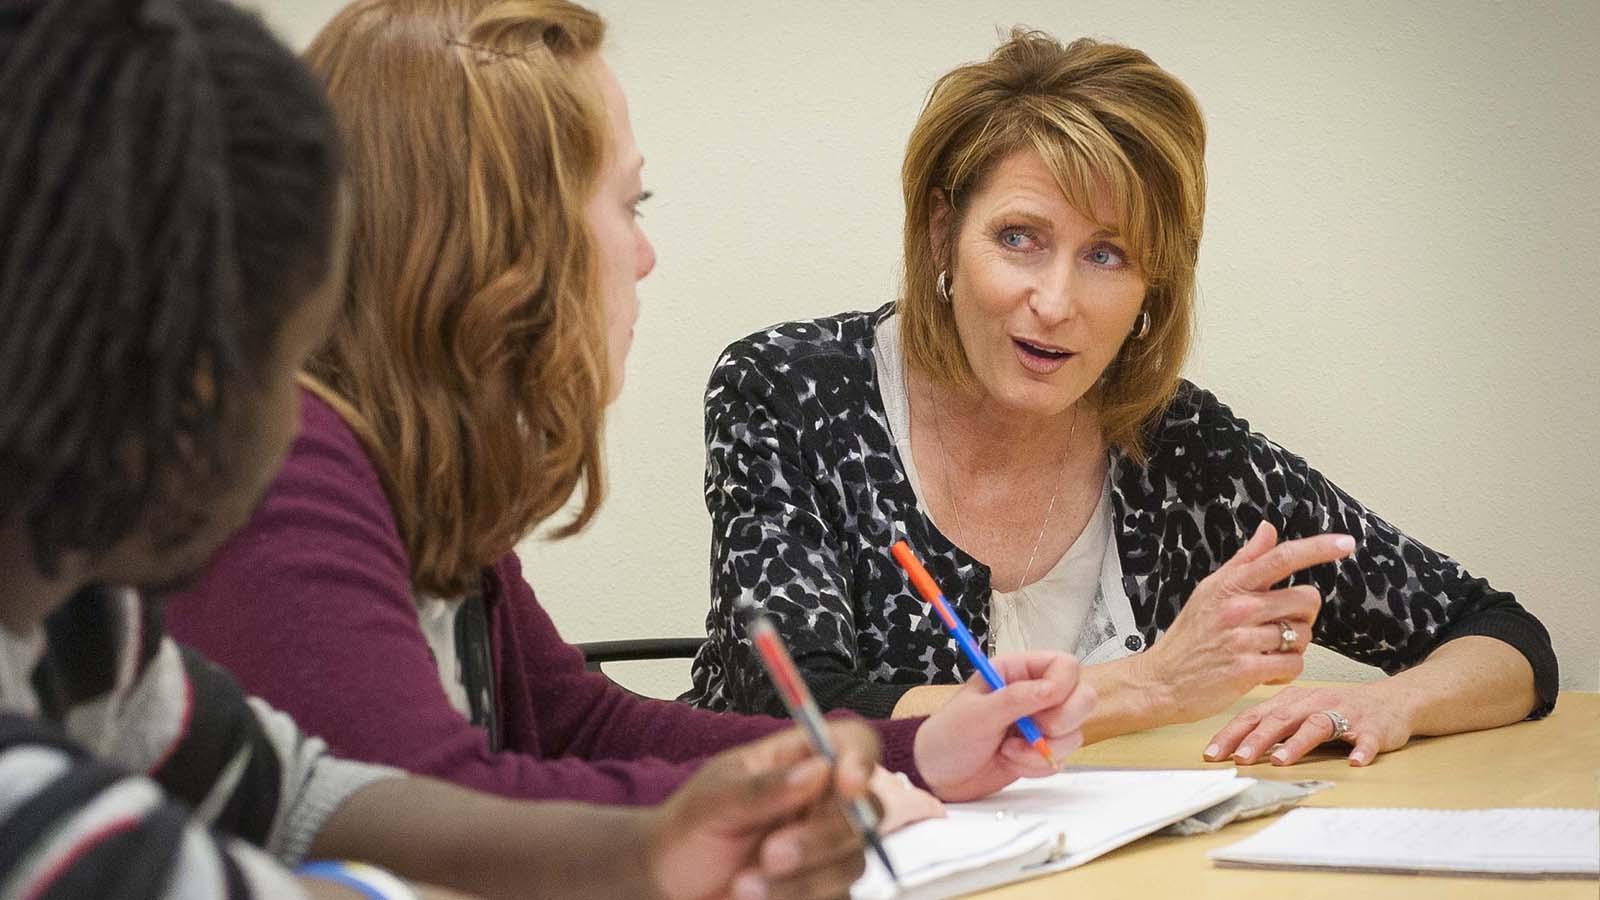 Professor Brenda Tufte engaged with students